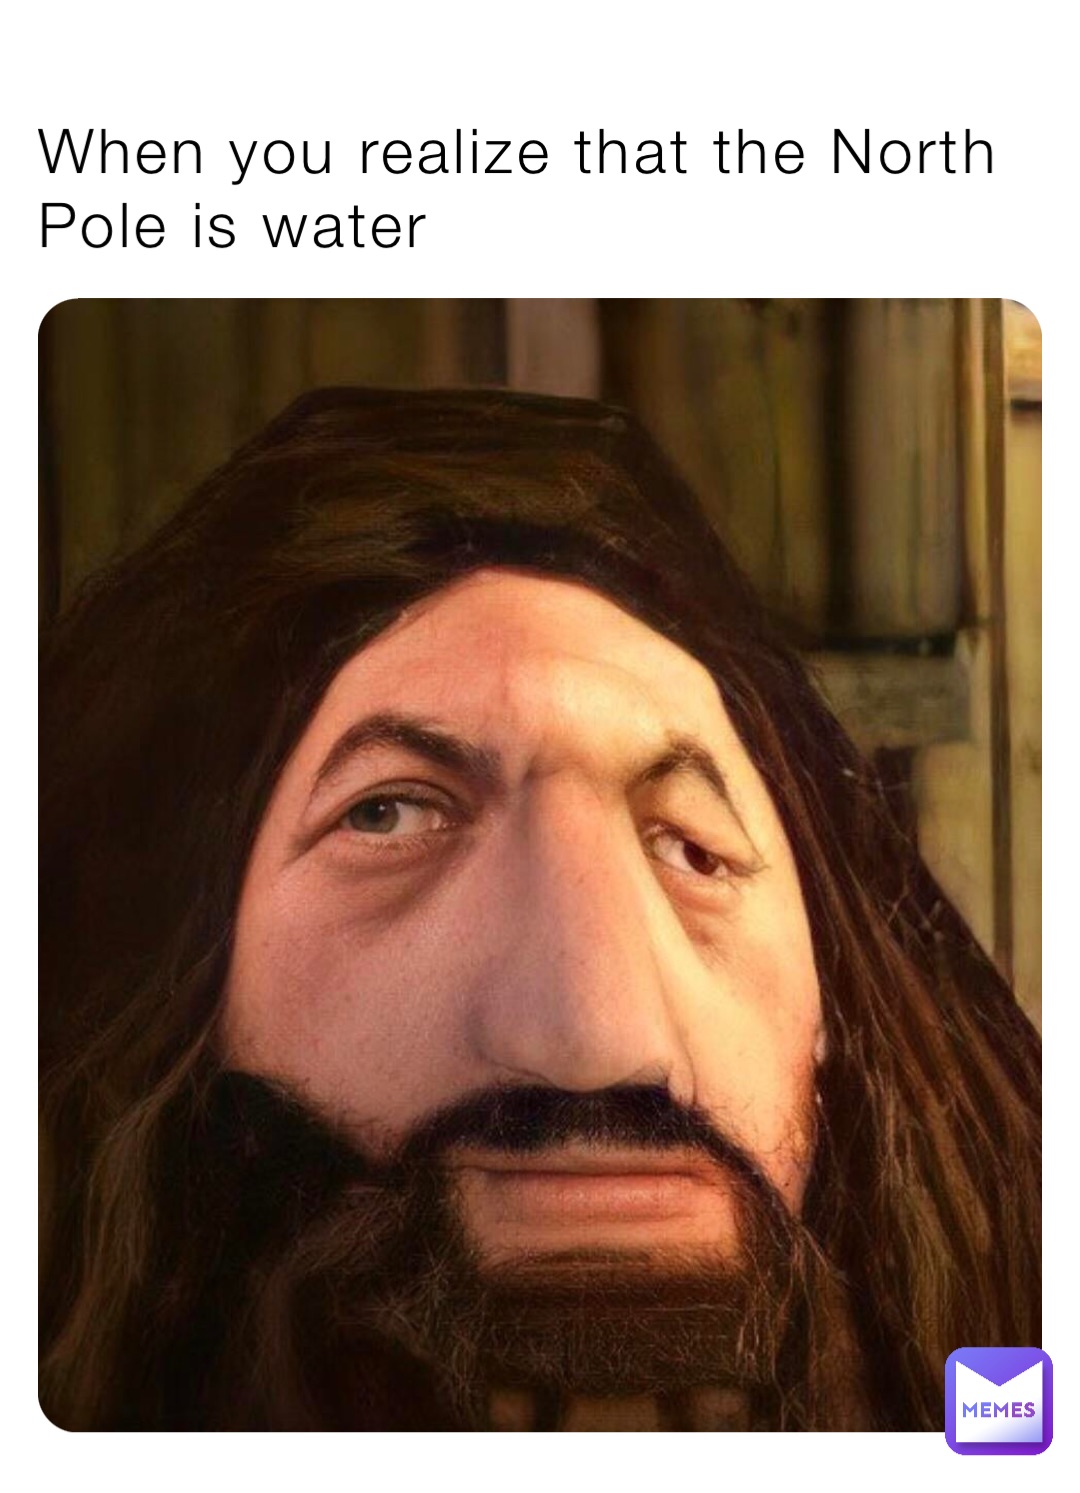 When you realize that the North Pole is water